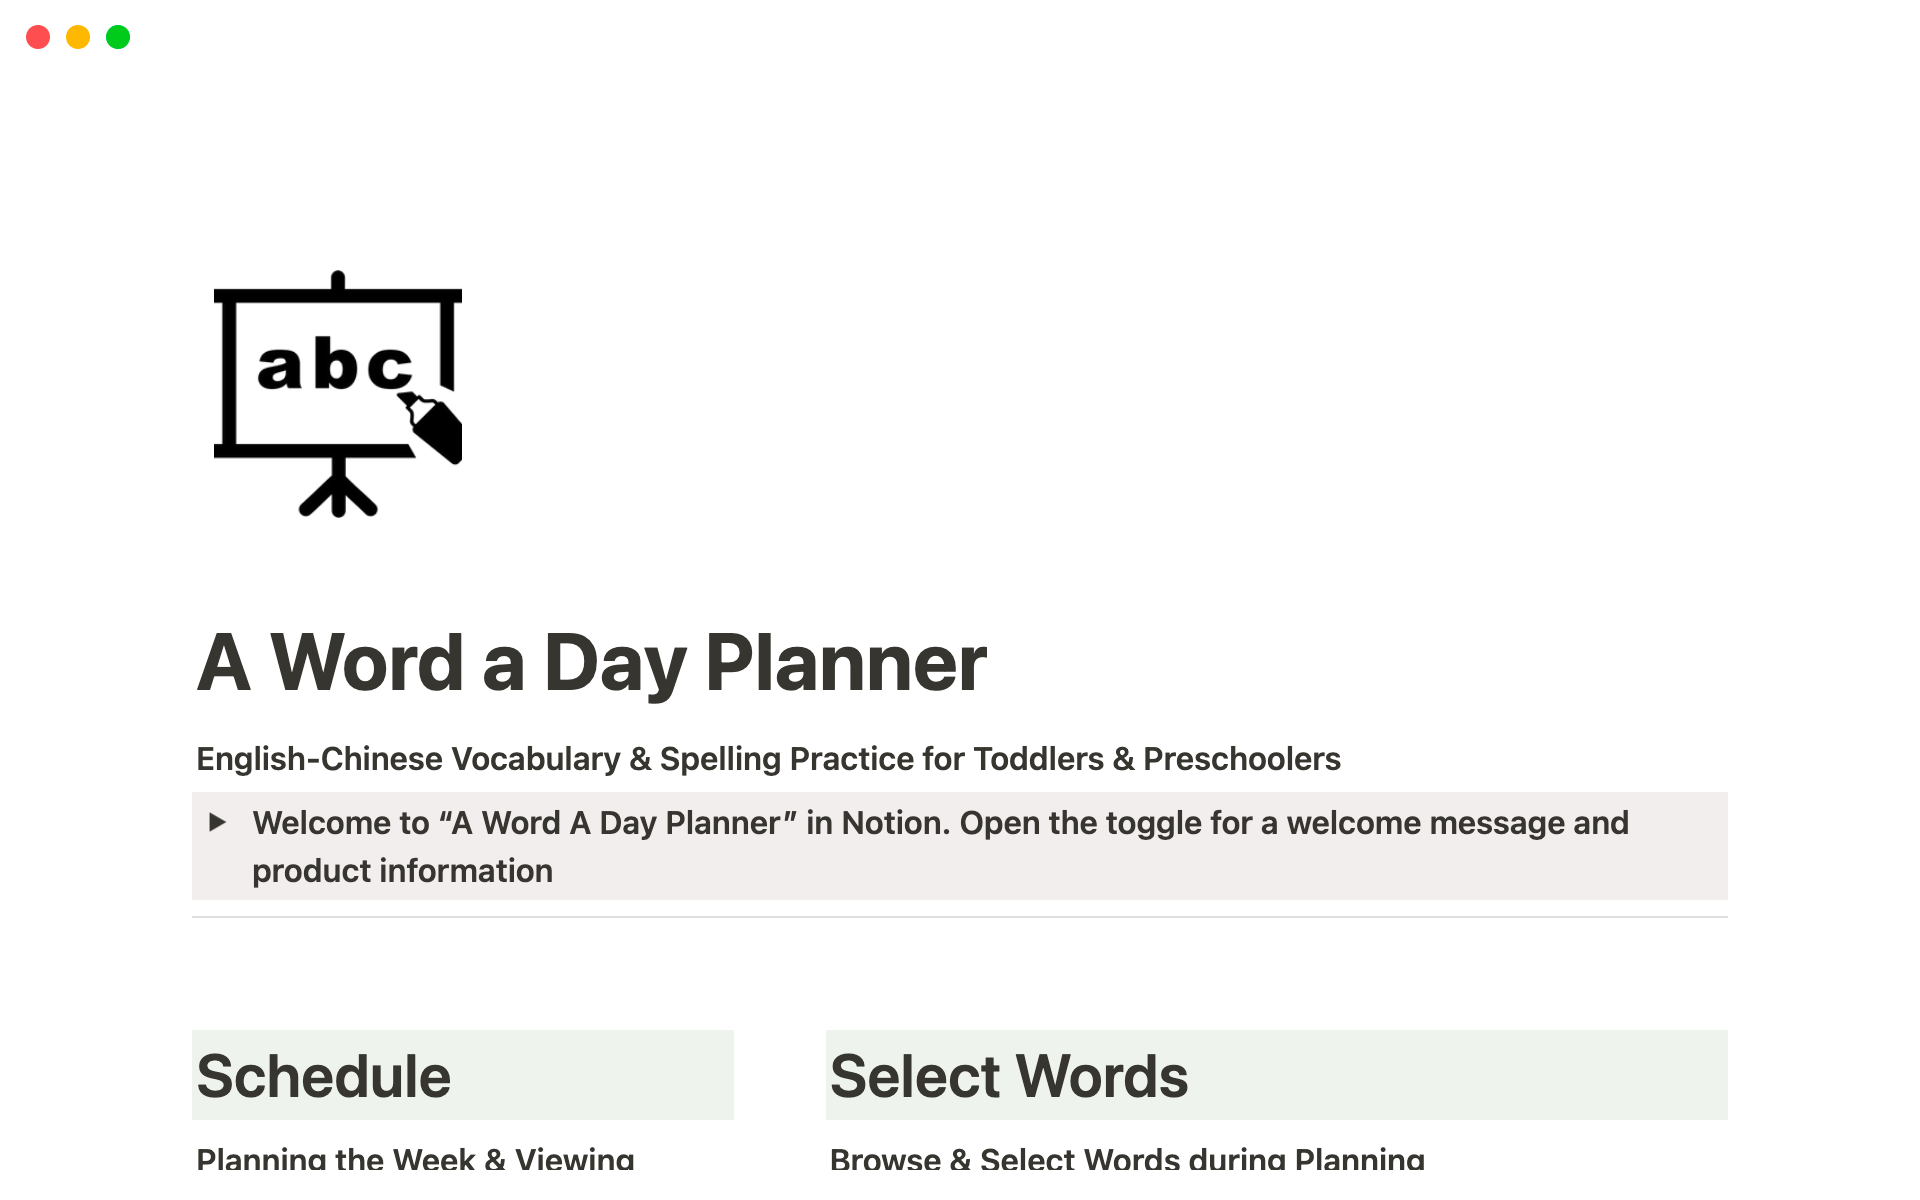 A Word A Day Planner | Chinese-English Words for Toddlers & Preschoolersのテンプレートのプレビュー